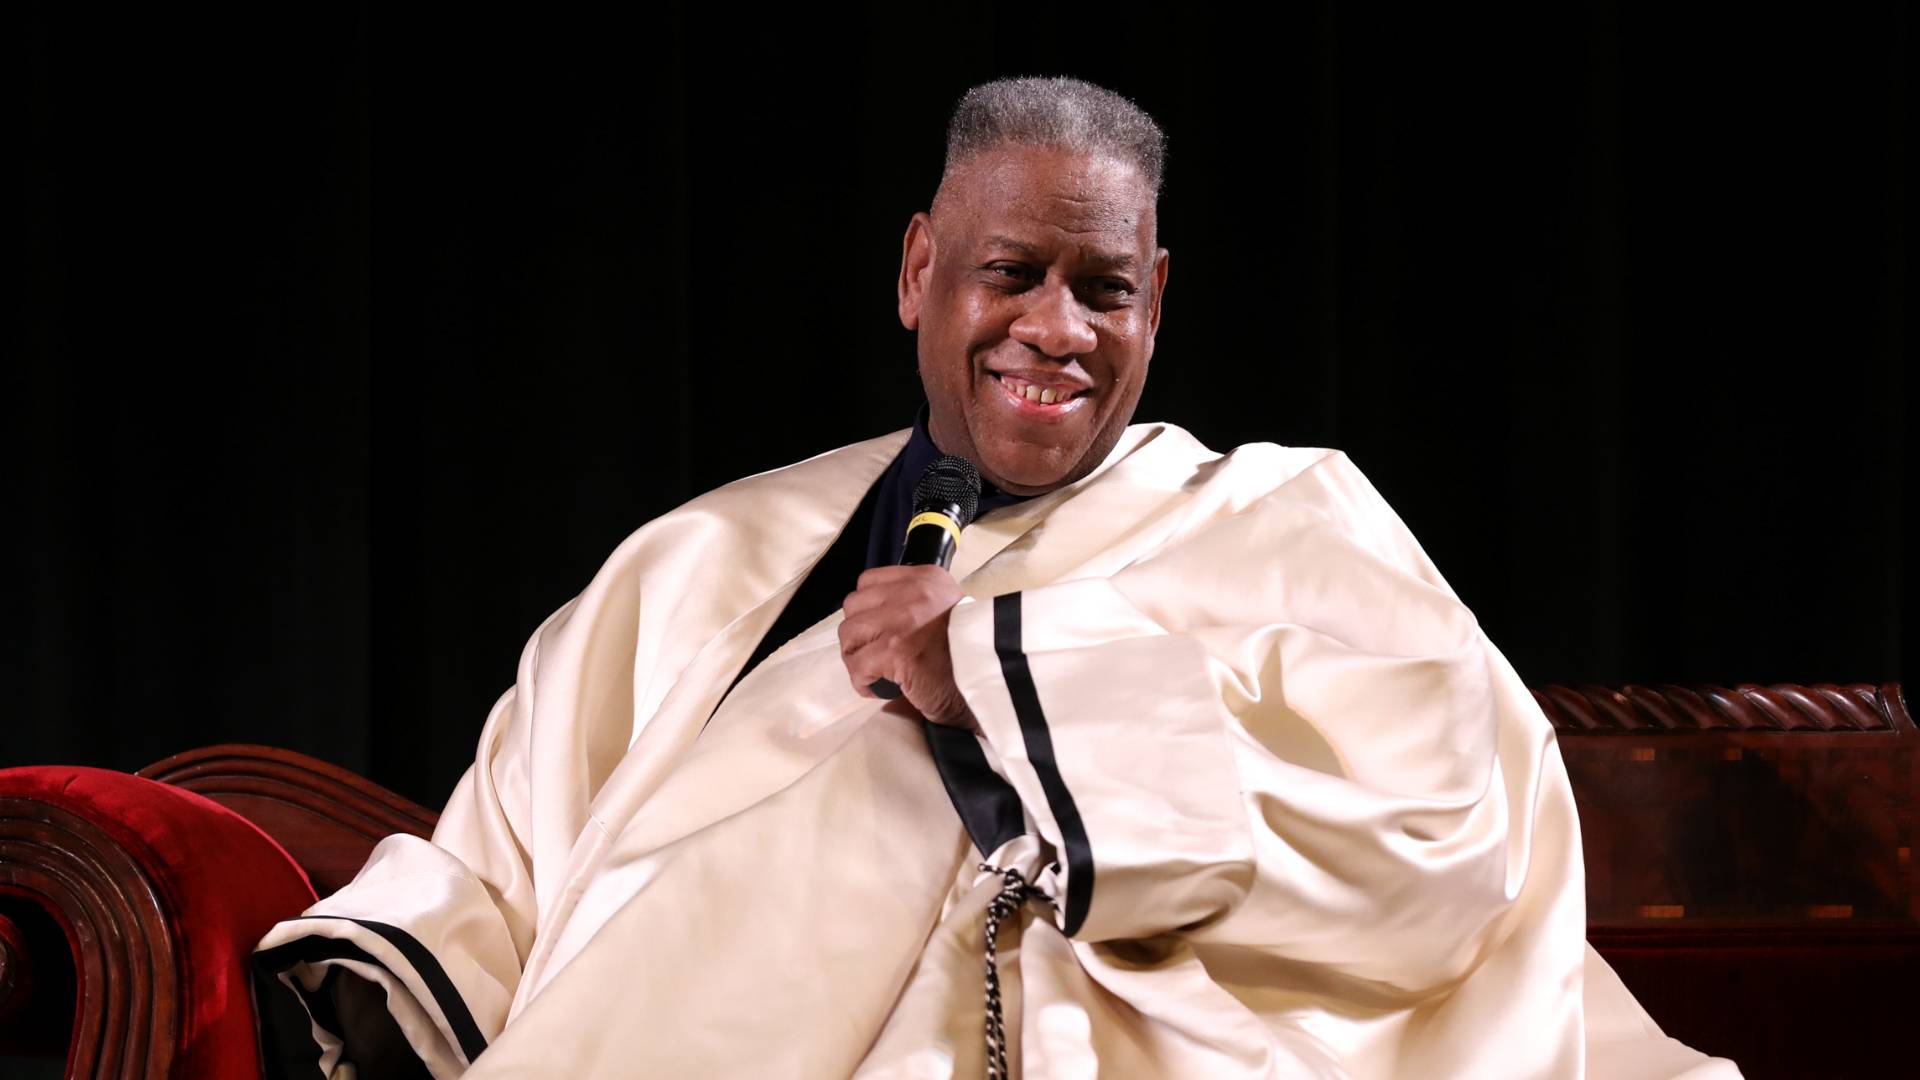 Andre Leon Talley speaks during 'The Gospel According to Andr' Q&A during the 21st SCAD Savannah Film Festival on November 2, 2018 in Savannah, Georgia. 